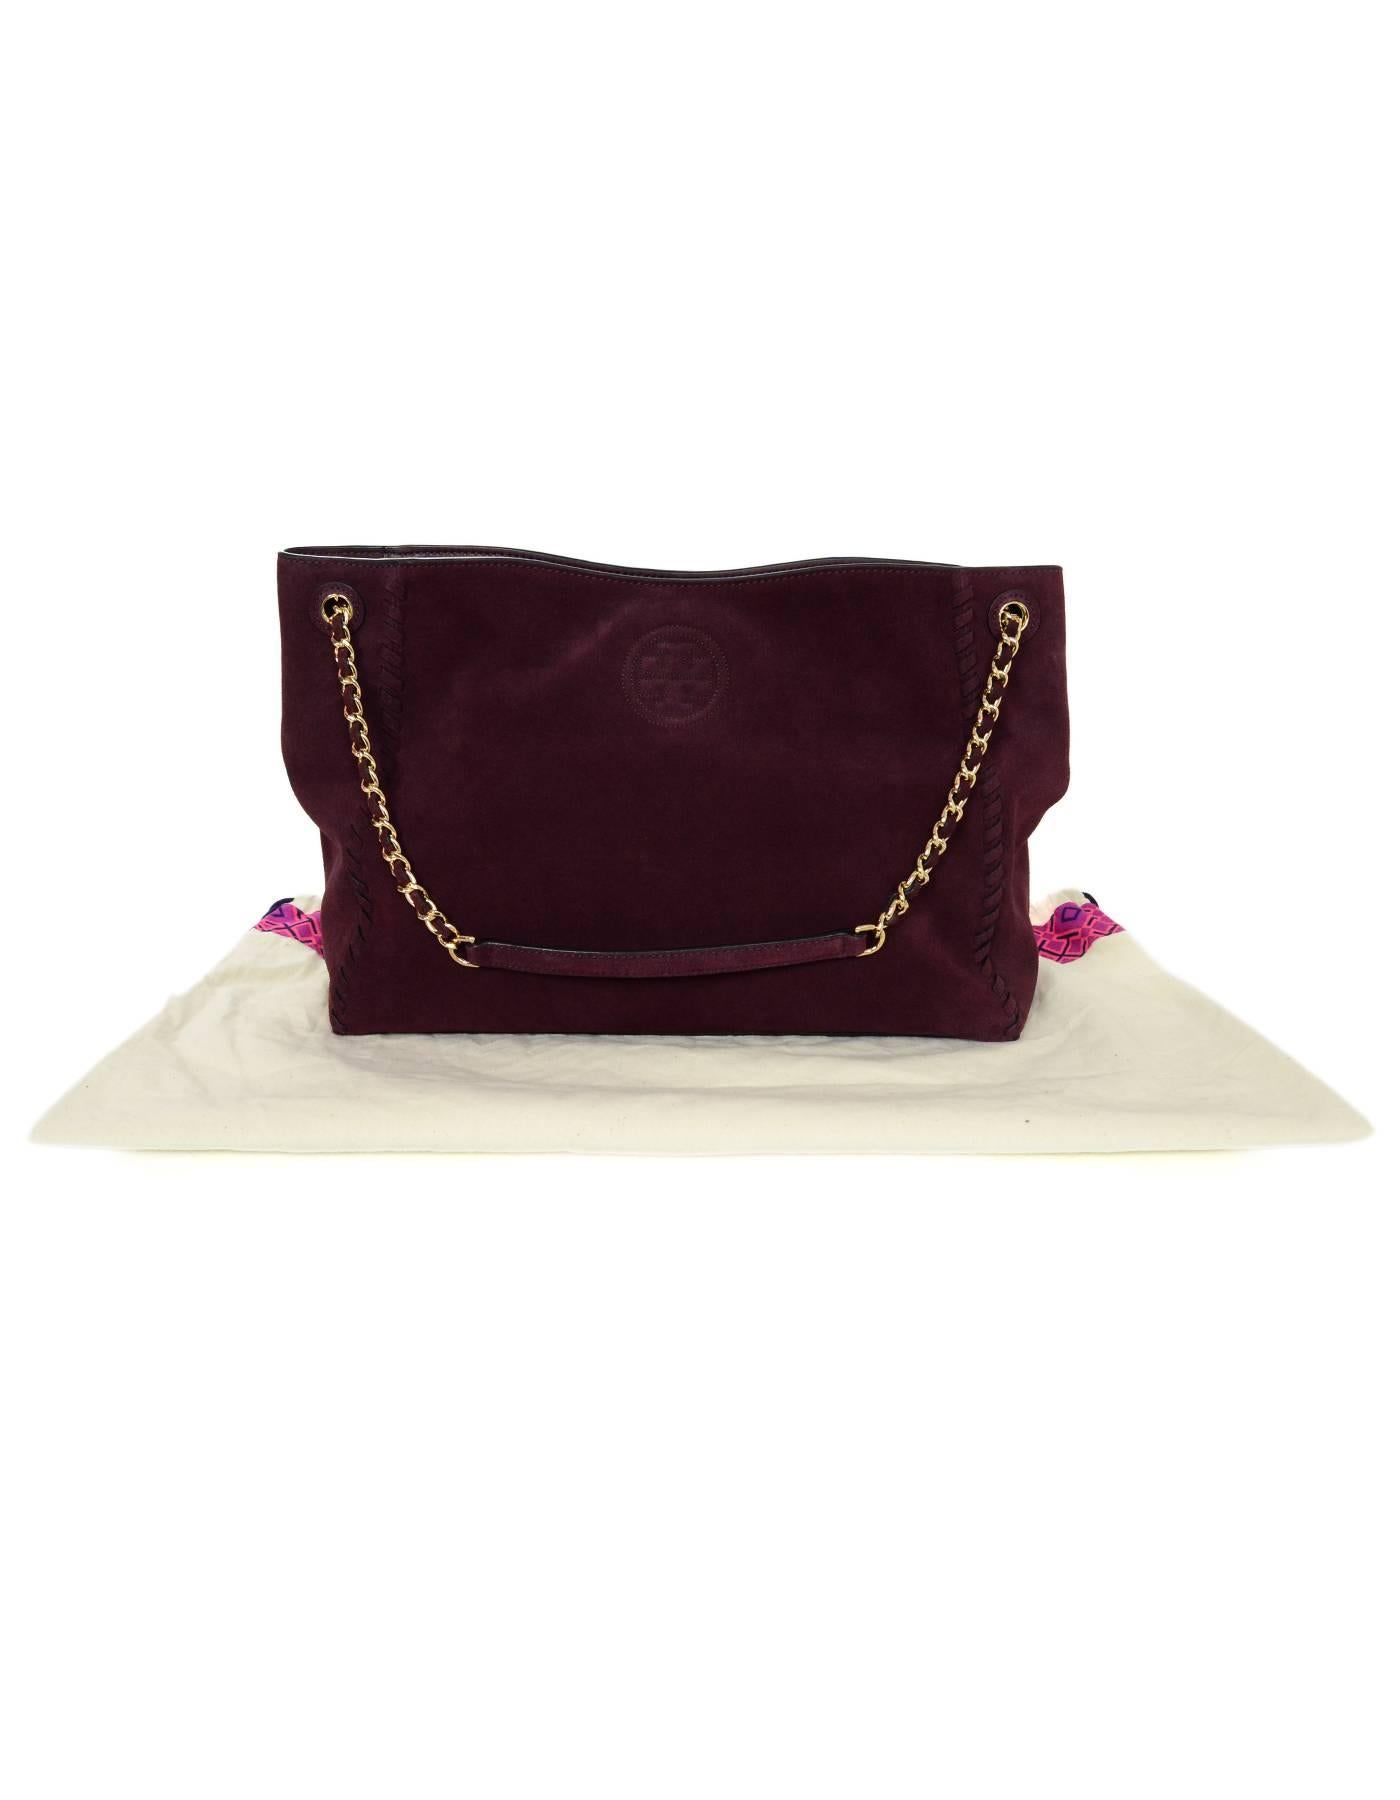 Tory Burch Wine Suede Marion Tote Bag 1